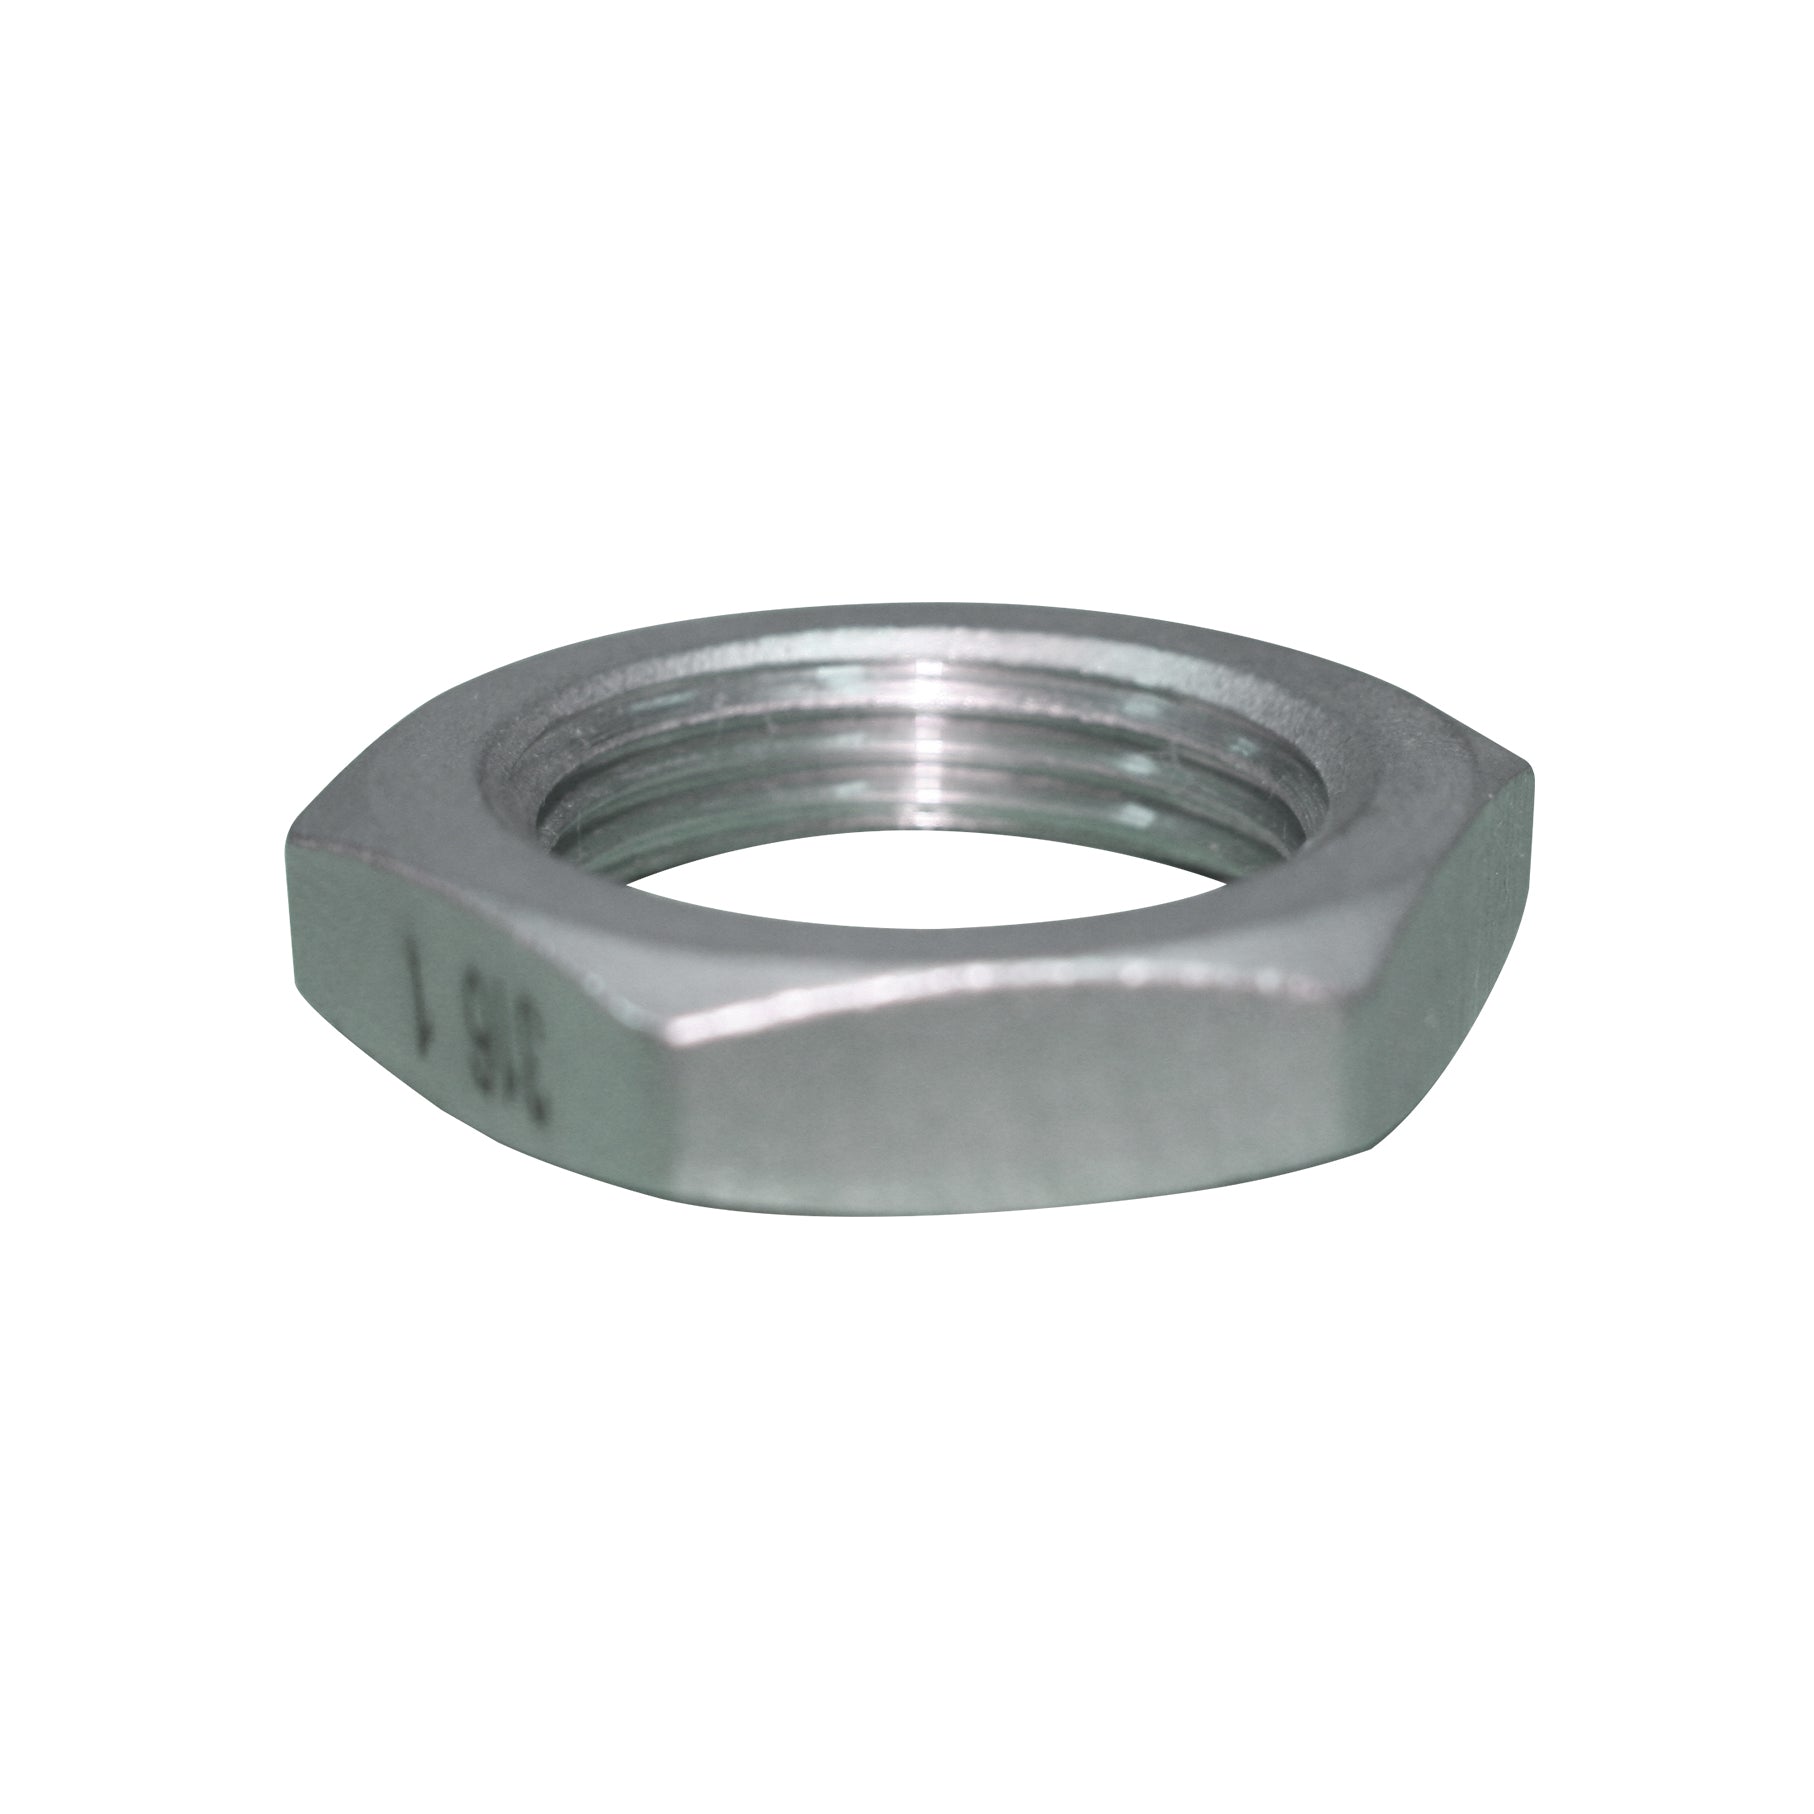 1 1/4" Stainless Steel Back Nut. SS150